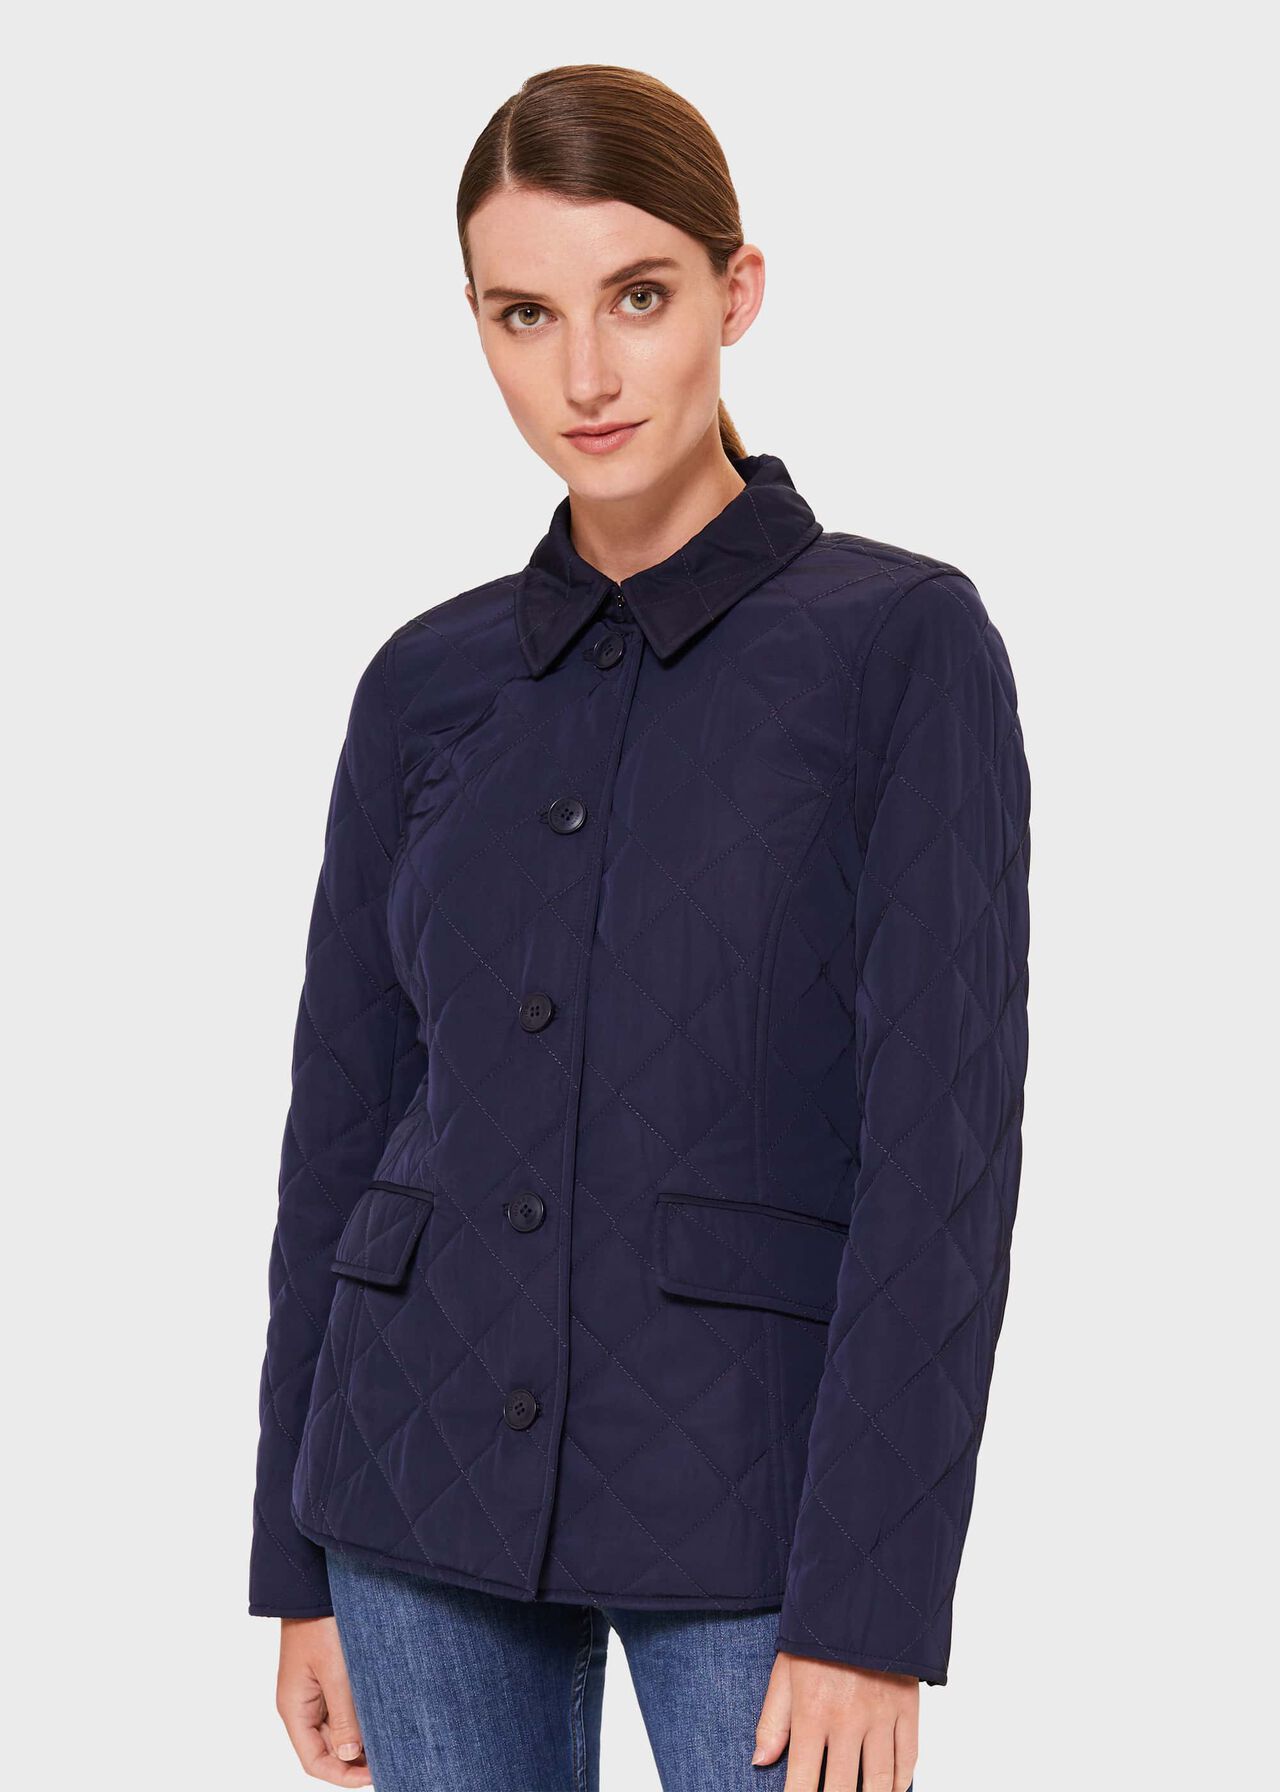 Lianne Quilted Coat, Midnight, hi-res